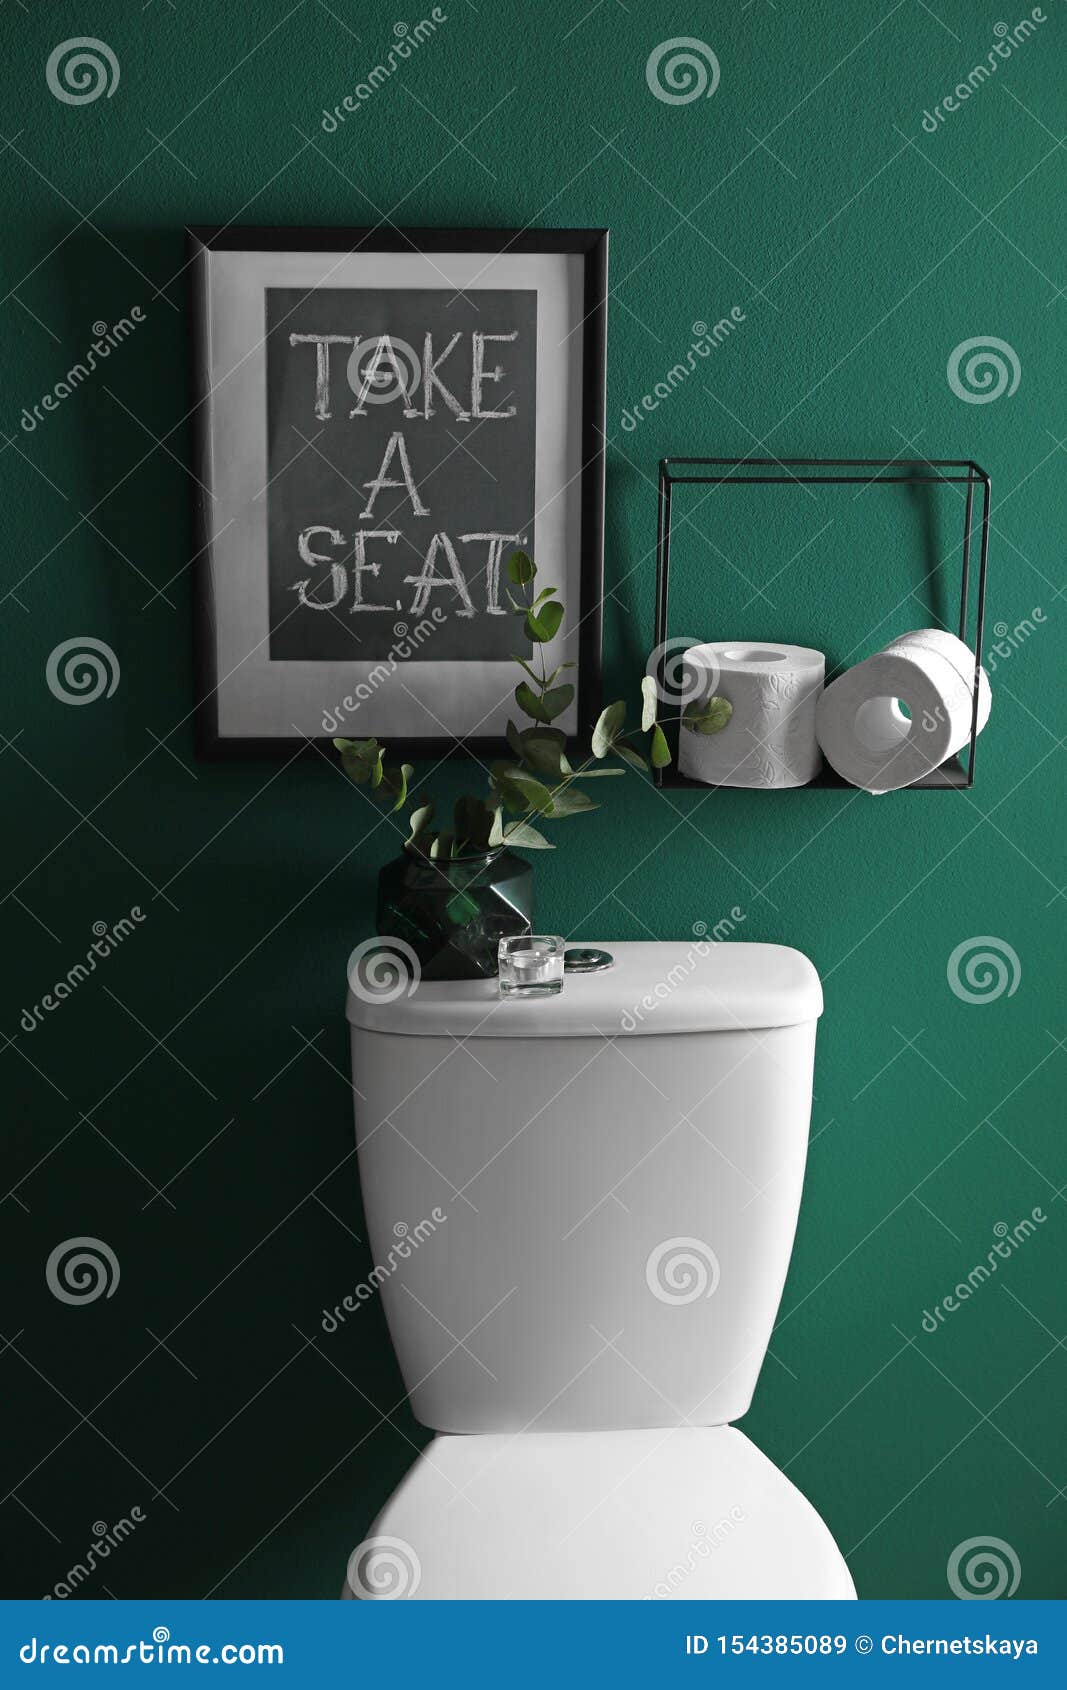 decor elements, paper rolls and toilet bowl near green